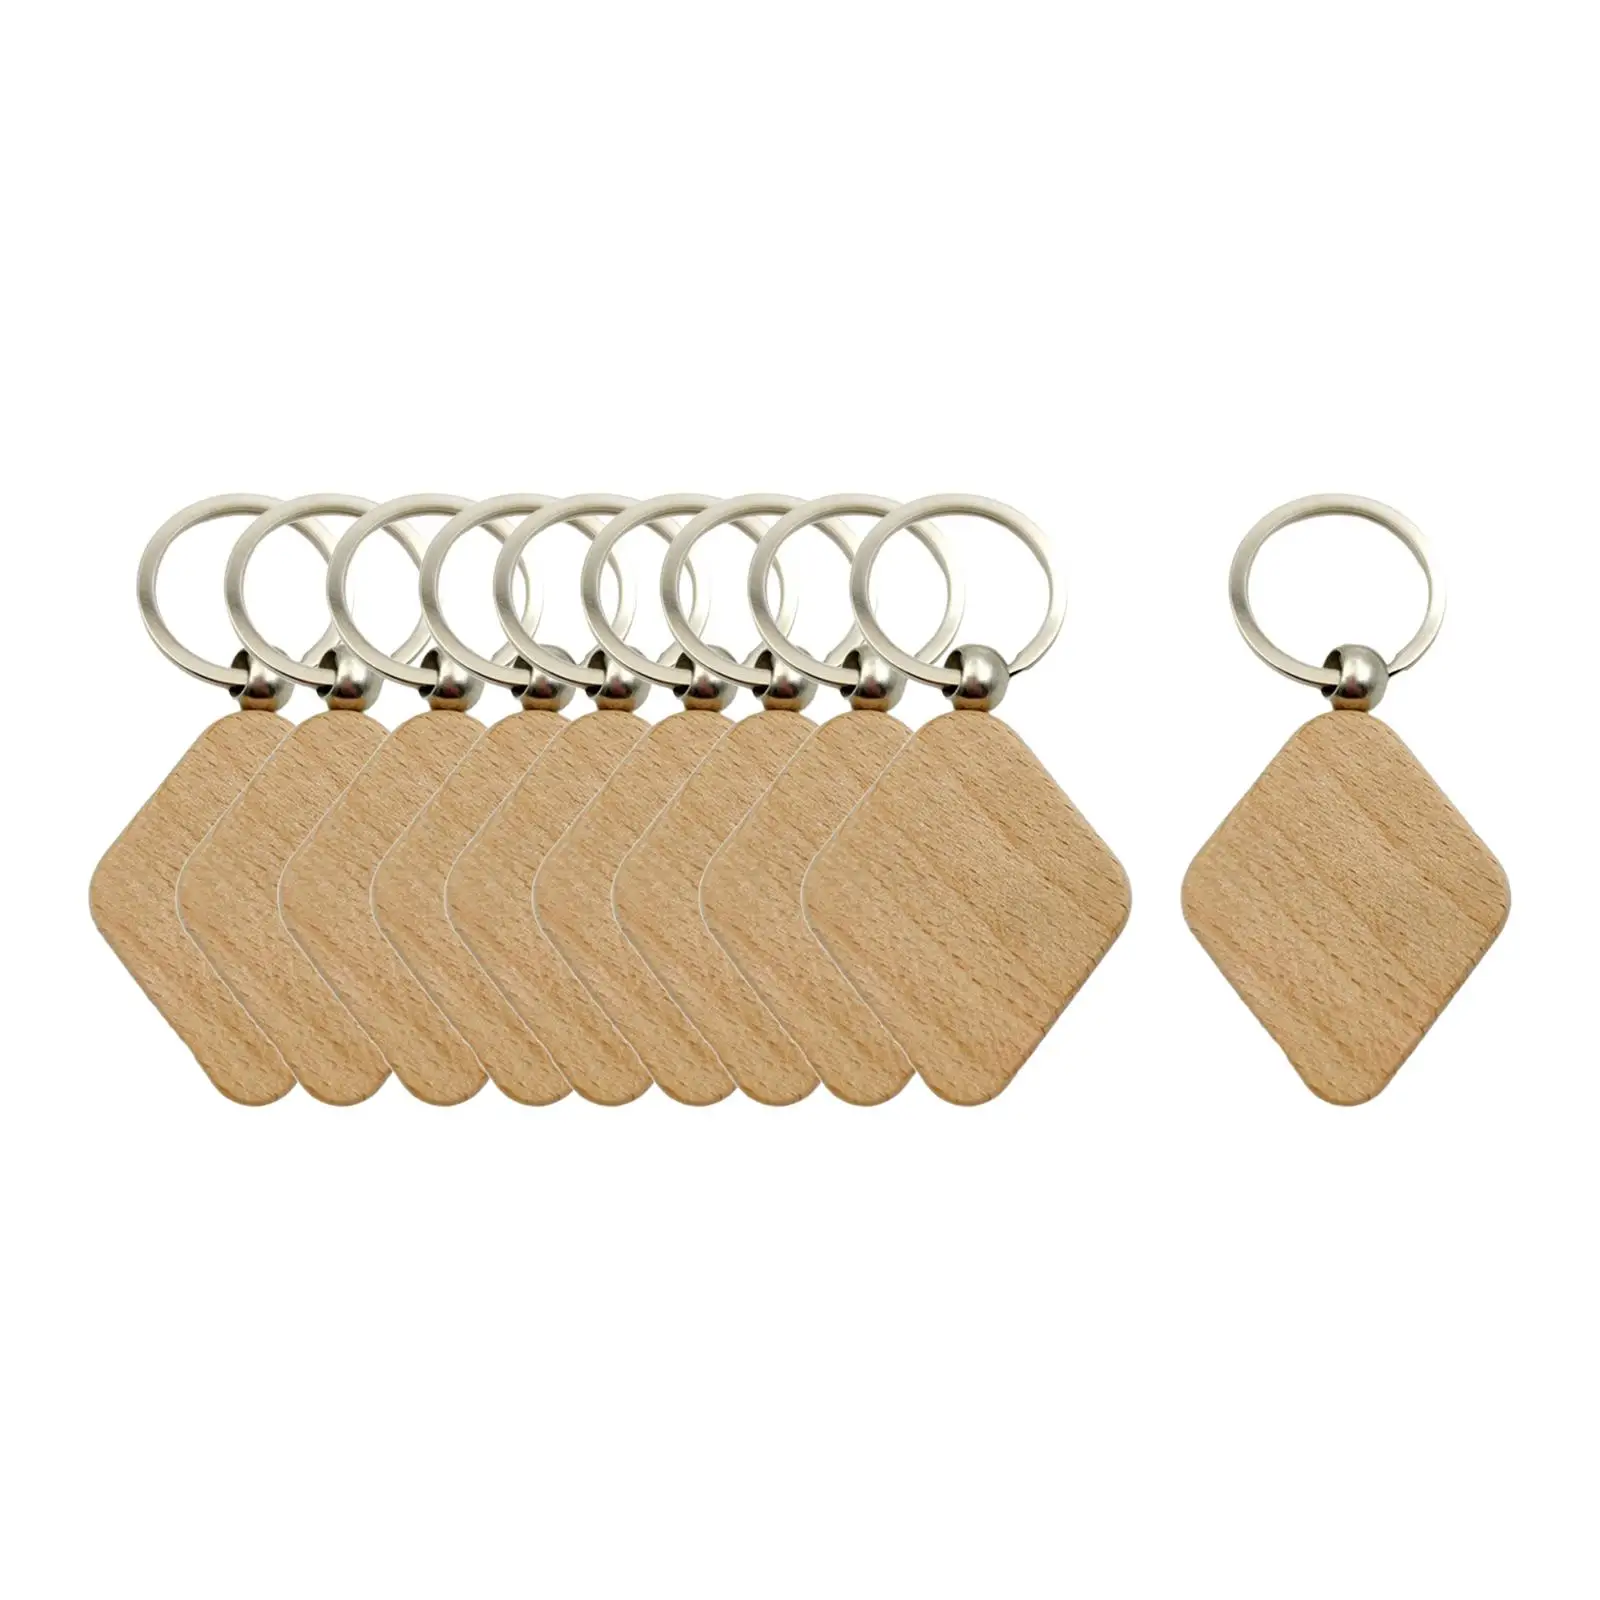 10Pcs Blanks Wooden Key Chain DIY Key Rings Handmade Unfinished Wood Piece Keychain Keyring for Crafting Engraving Pyrography